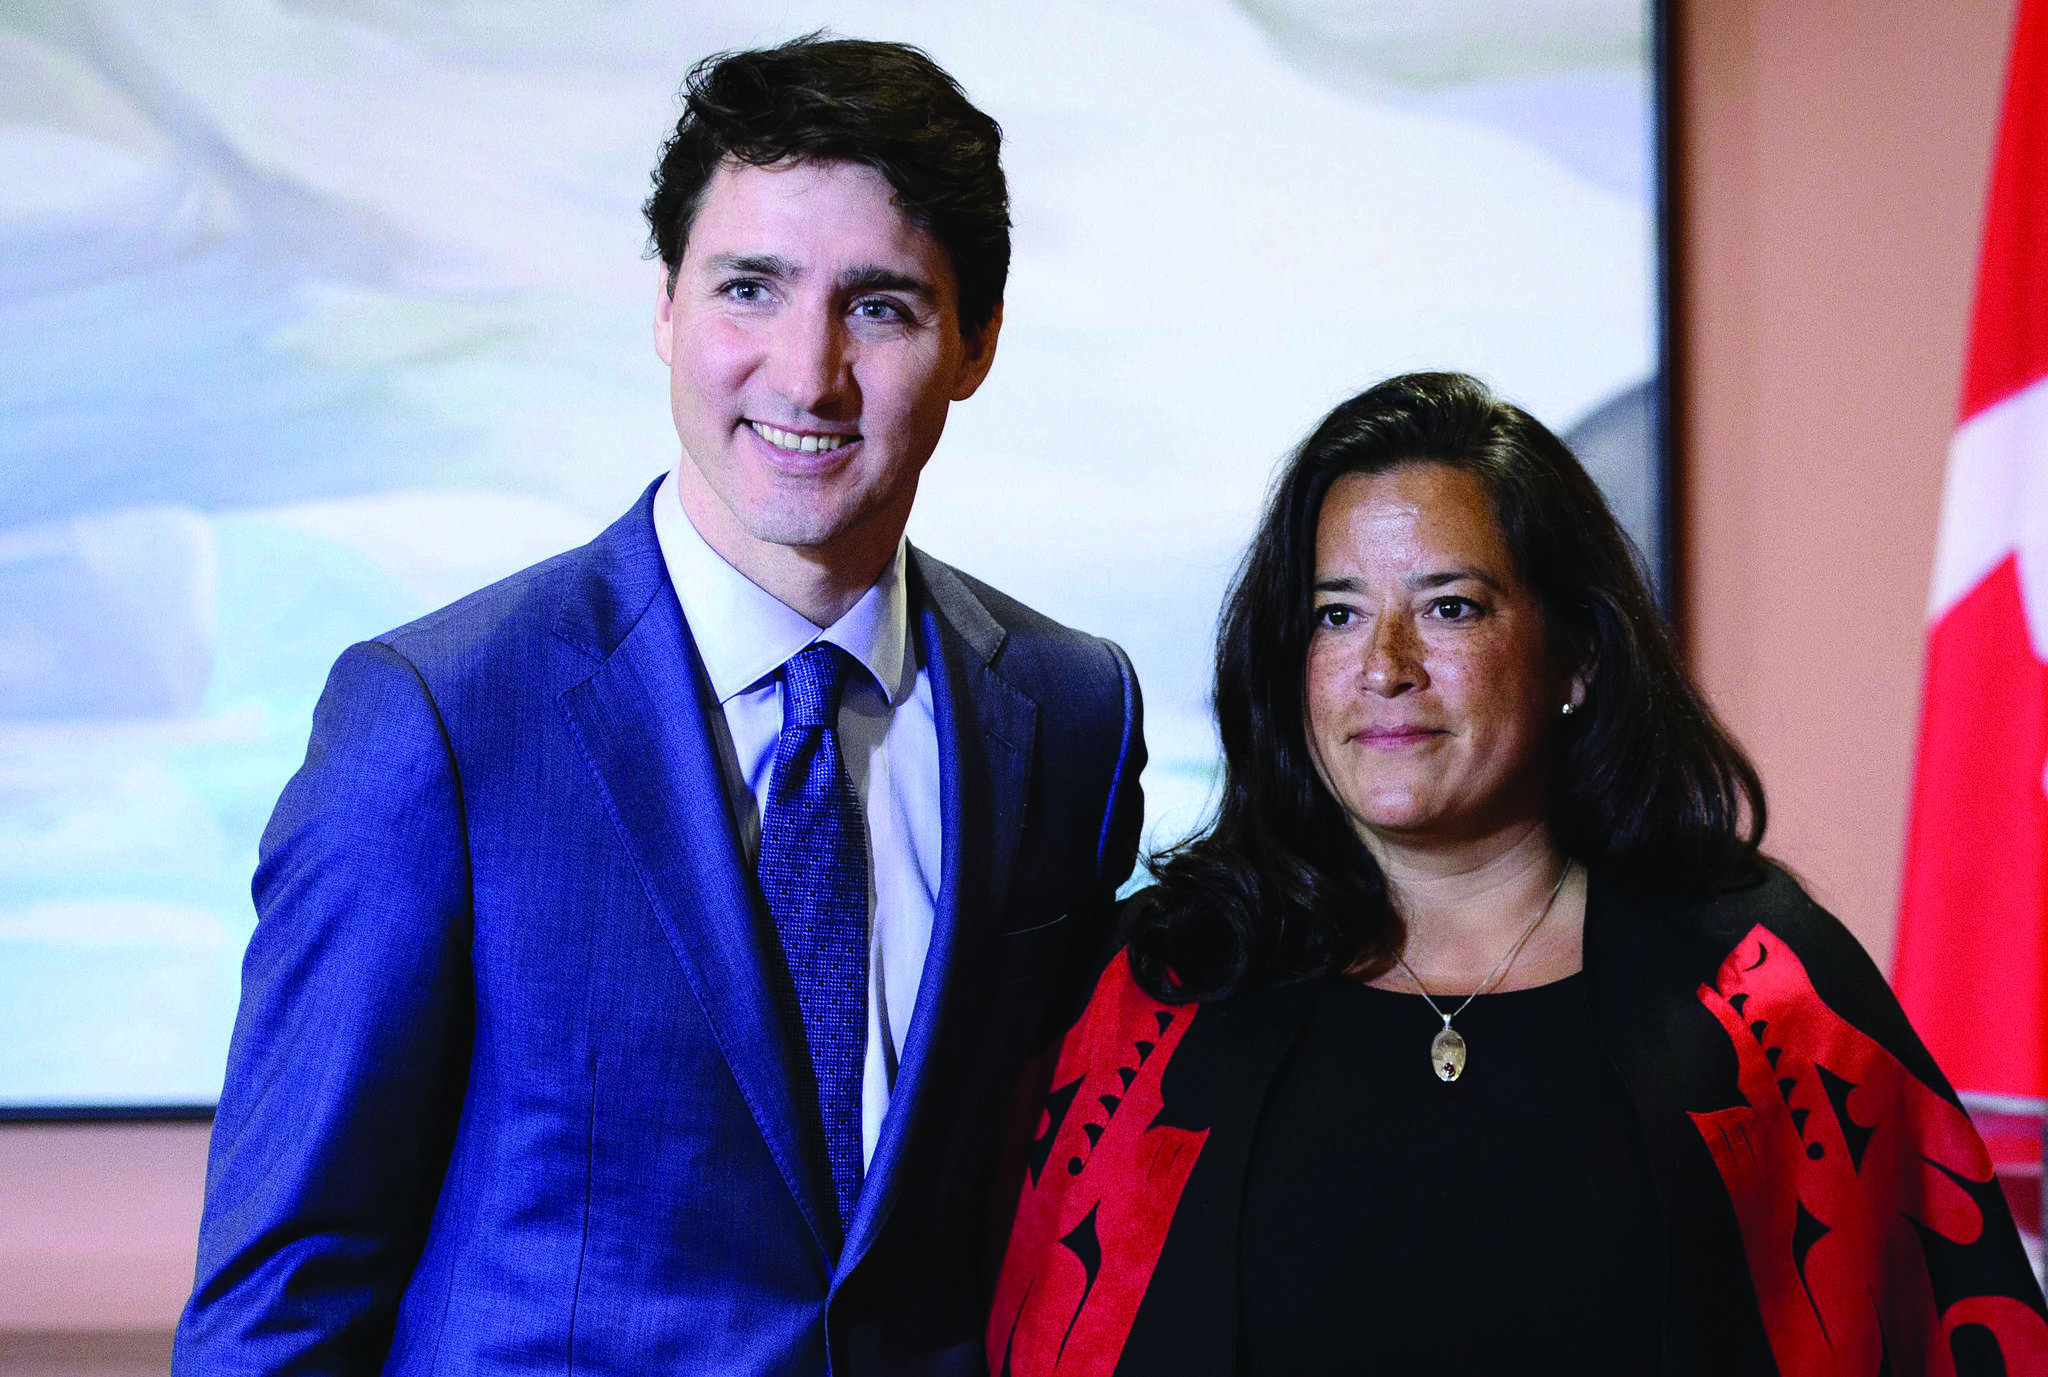 Prime Minister Justin Trudeau and Veterans Affairs Minister Jodie Wilson-Raybould attend a swearing in ceremony at Rideau Hall in Ottawa on Monday, Jan. 14, 2019. The Globe and Mail says former justice minister Jody Wilson-Raybould disappointed the Prime Minister’s Office by refusing to help SNC-Lavalin avoid a criminal prosecution. (Sean Kilpatrick/The Canadian Press)